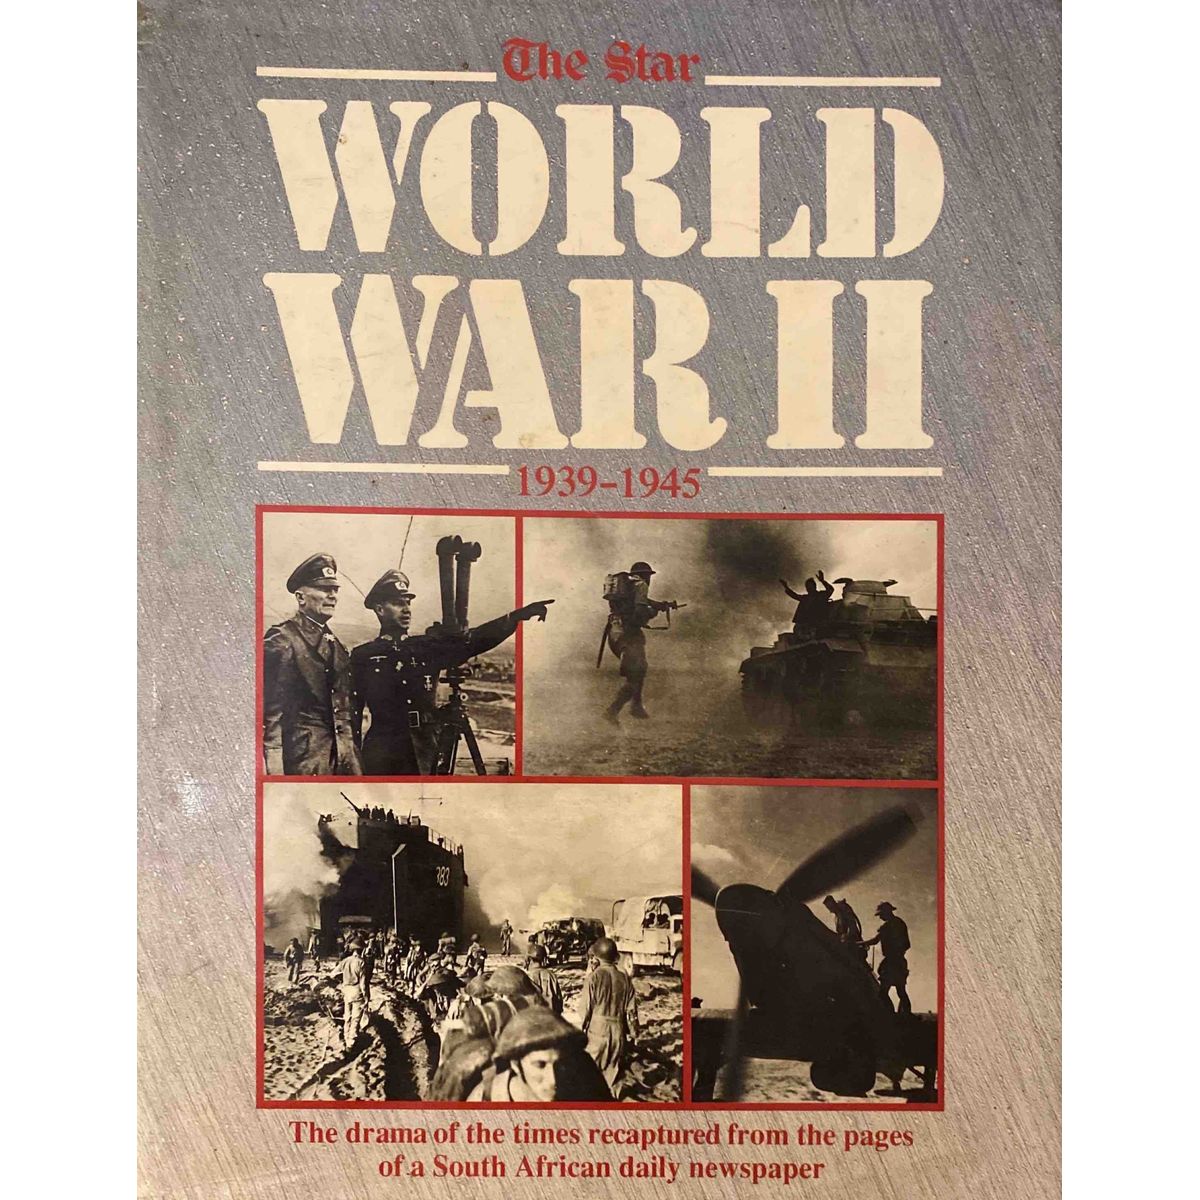 ISBN: 9781868251452 / 1868251454 - The Star World War II 1939-1945: The Drama of the Times by John Pitts [1989]